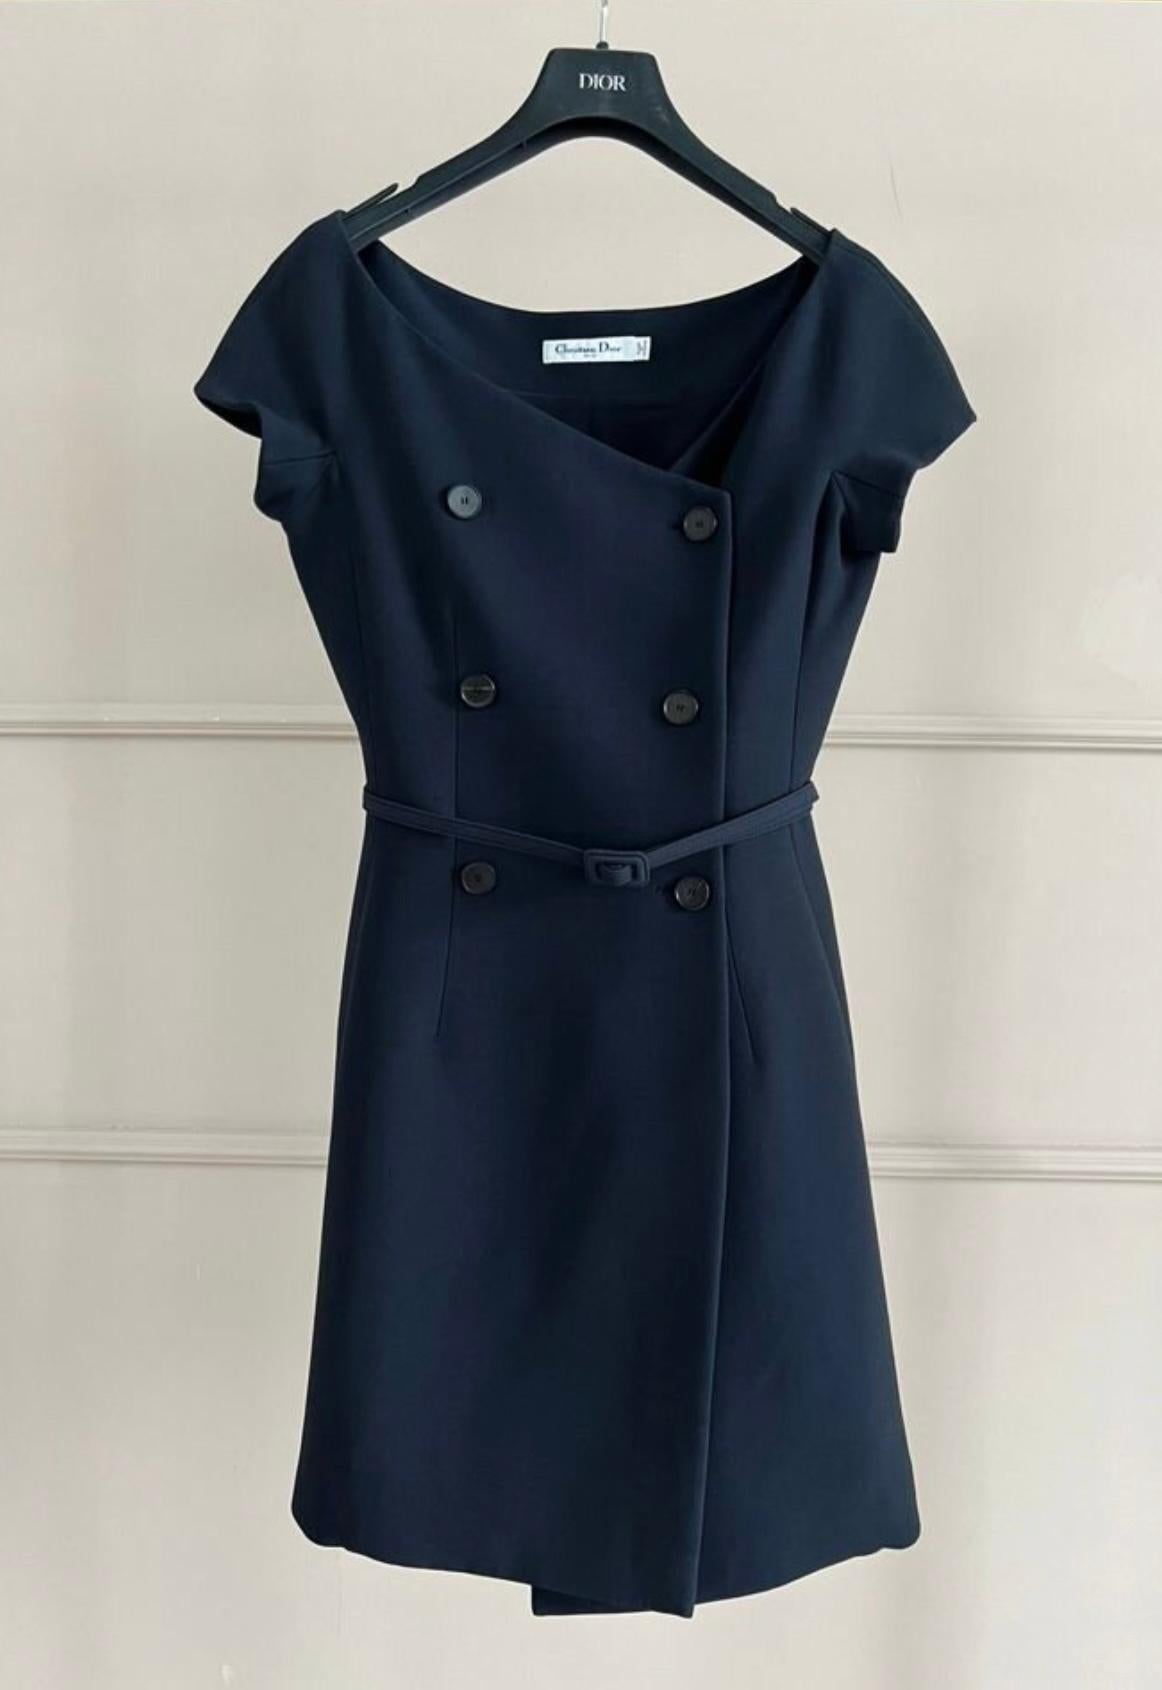 Women's or Men's Dior 5K$ Iconic Dark Navy Double Breasted Dress